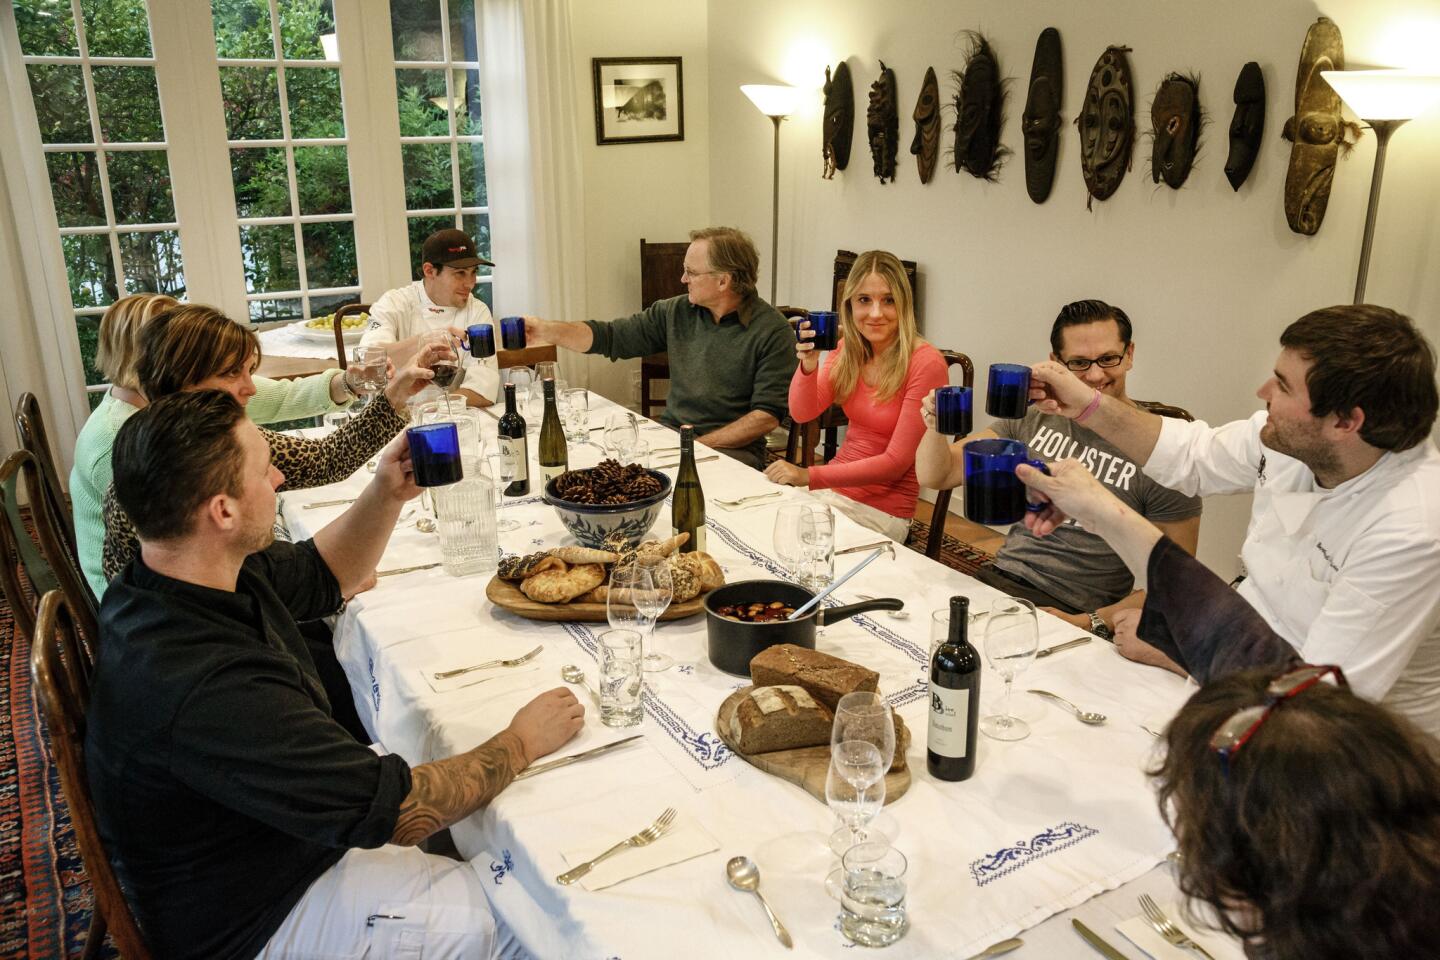 Guests toast during a dinner prepared by Chef Bernhard Mairinger of BierBeisl, right, as a demonstration of an Austrian Christmas, at the home of Richard Sparks and Jenny Okun.